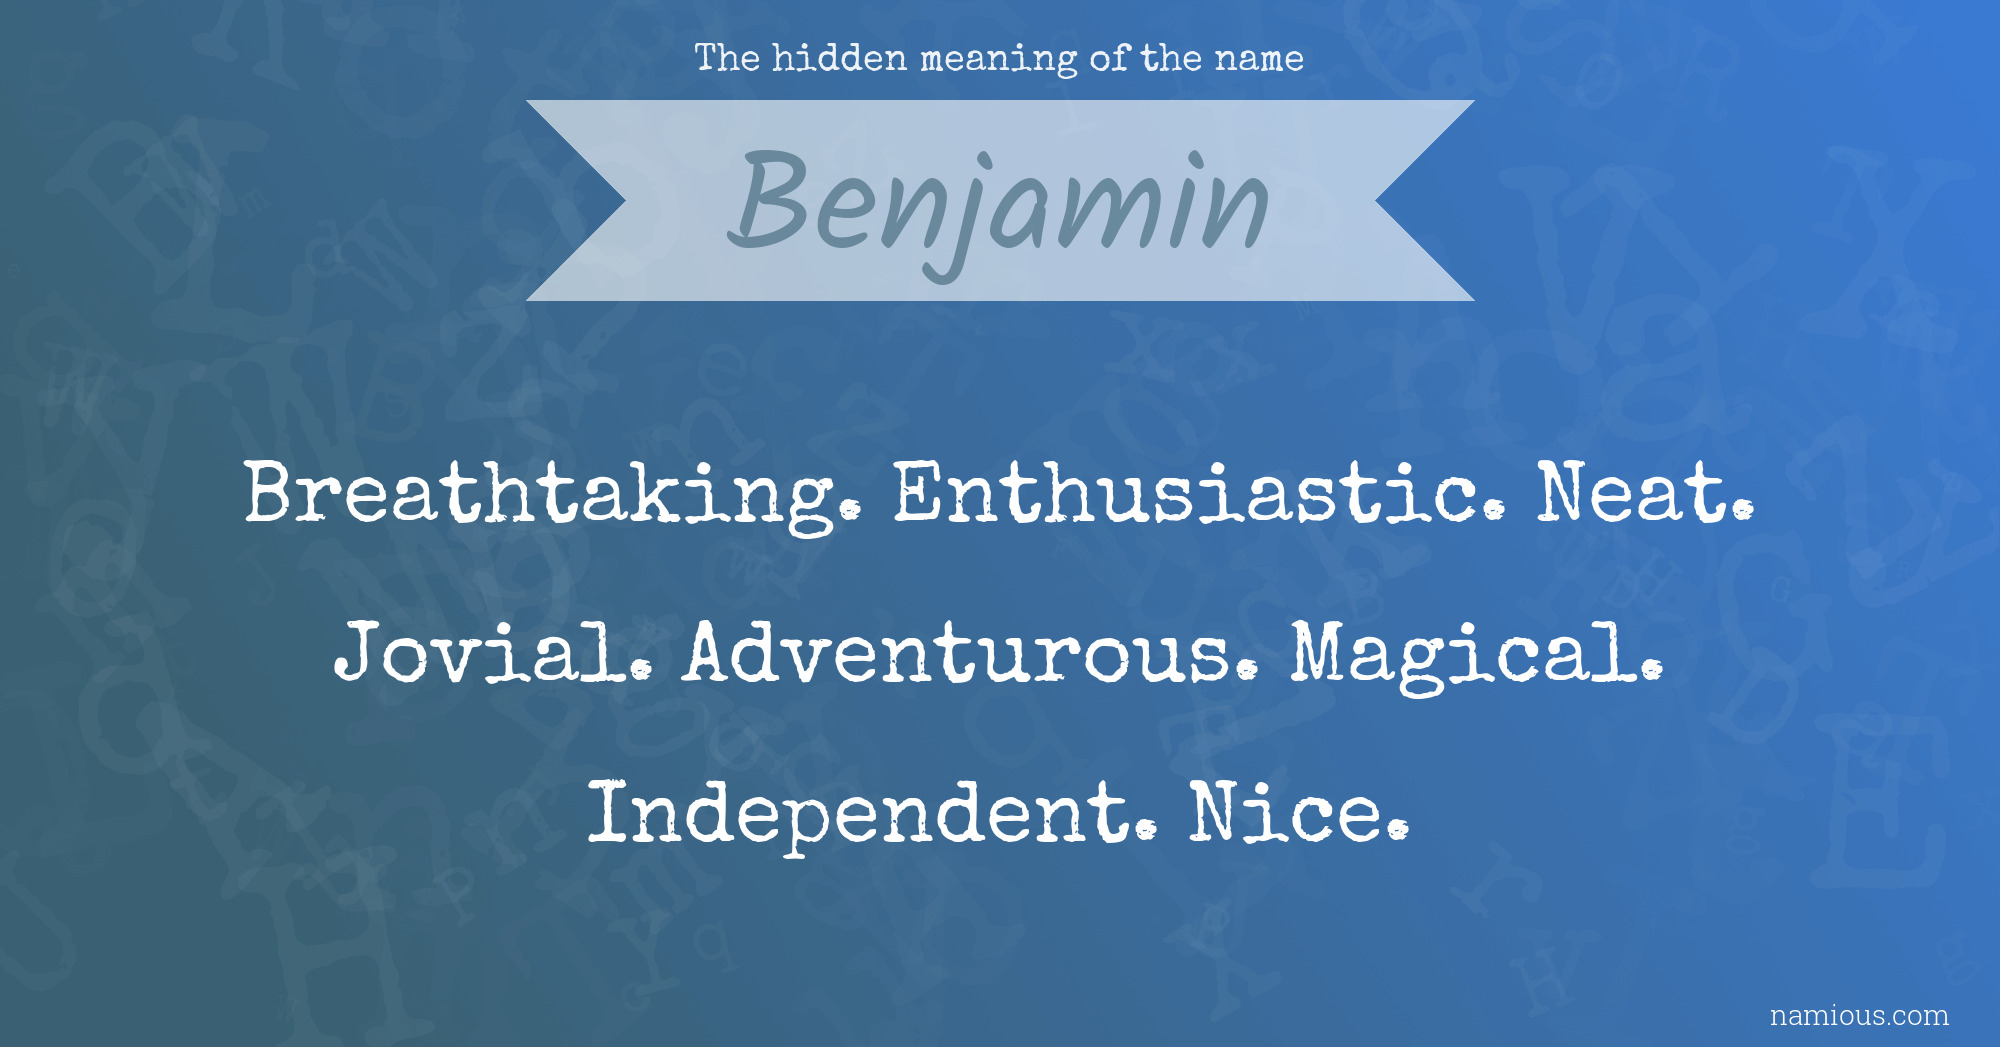 The hidden meaning of the name Benjamin